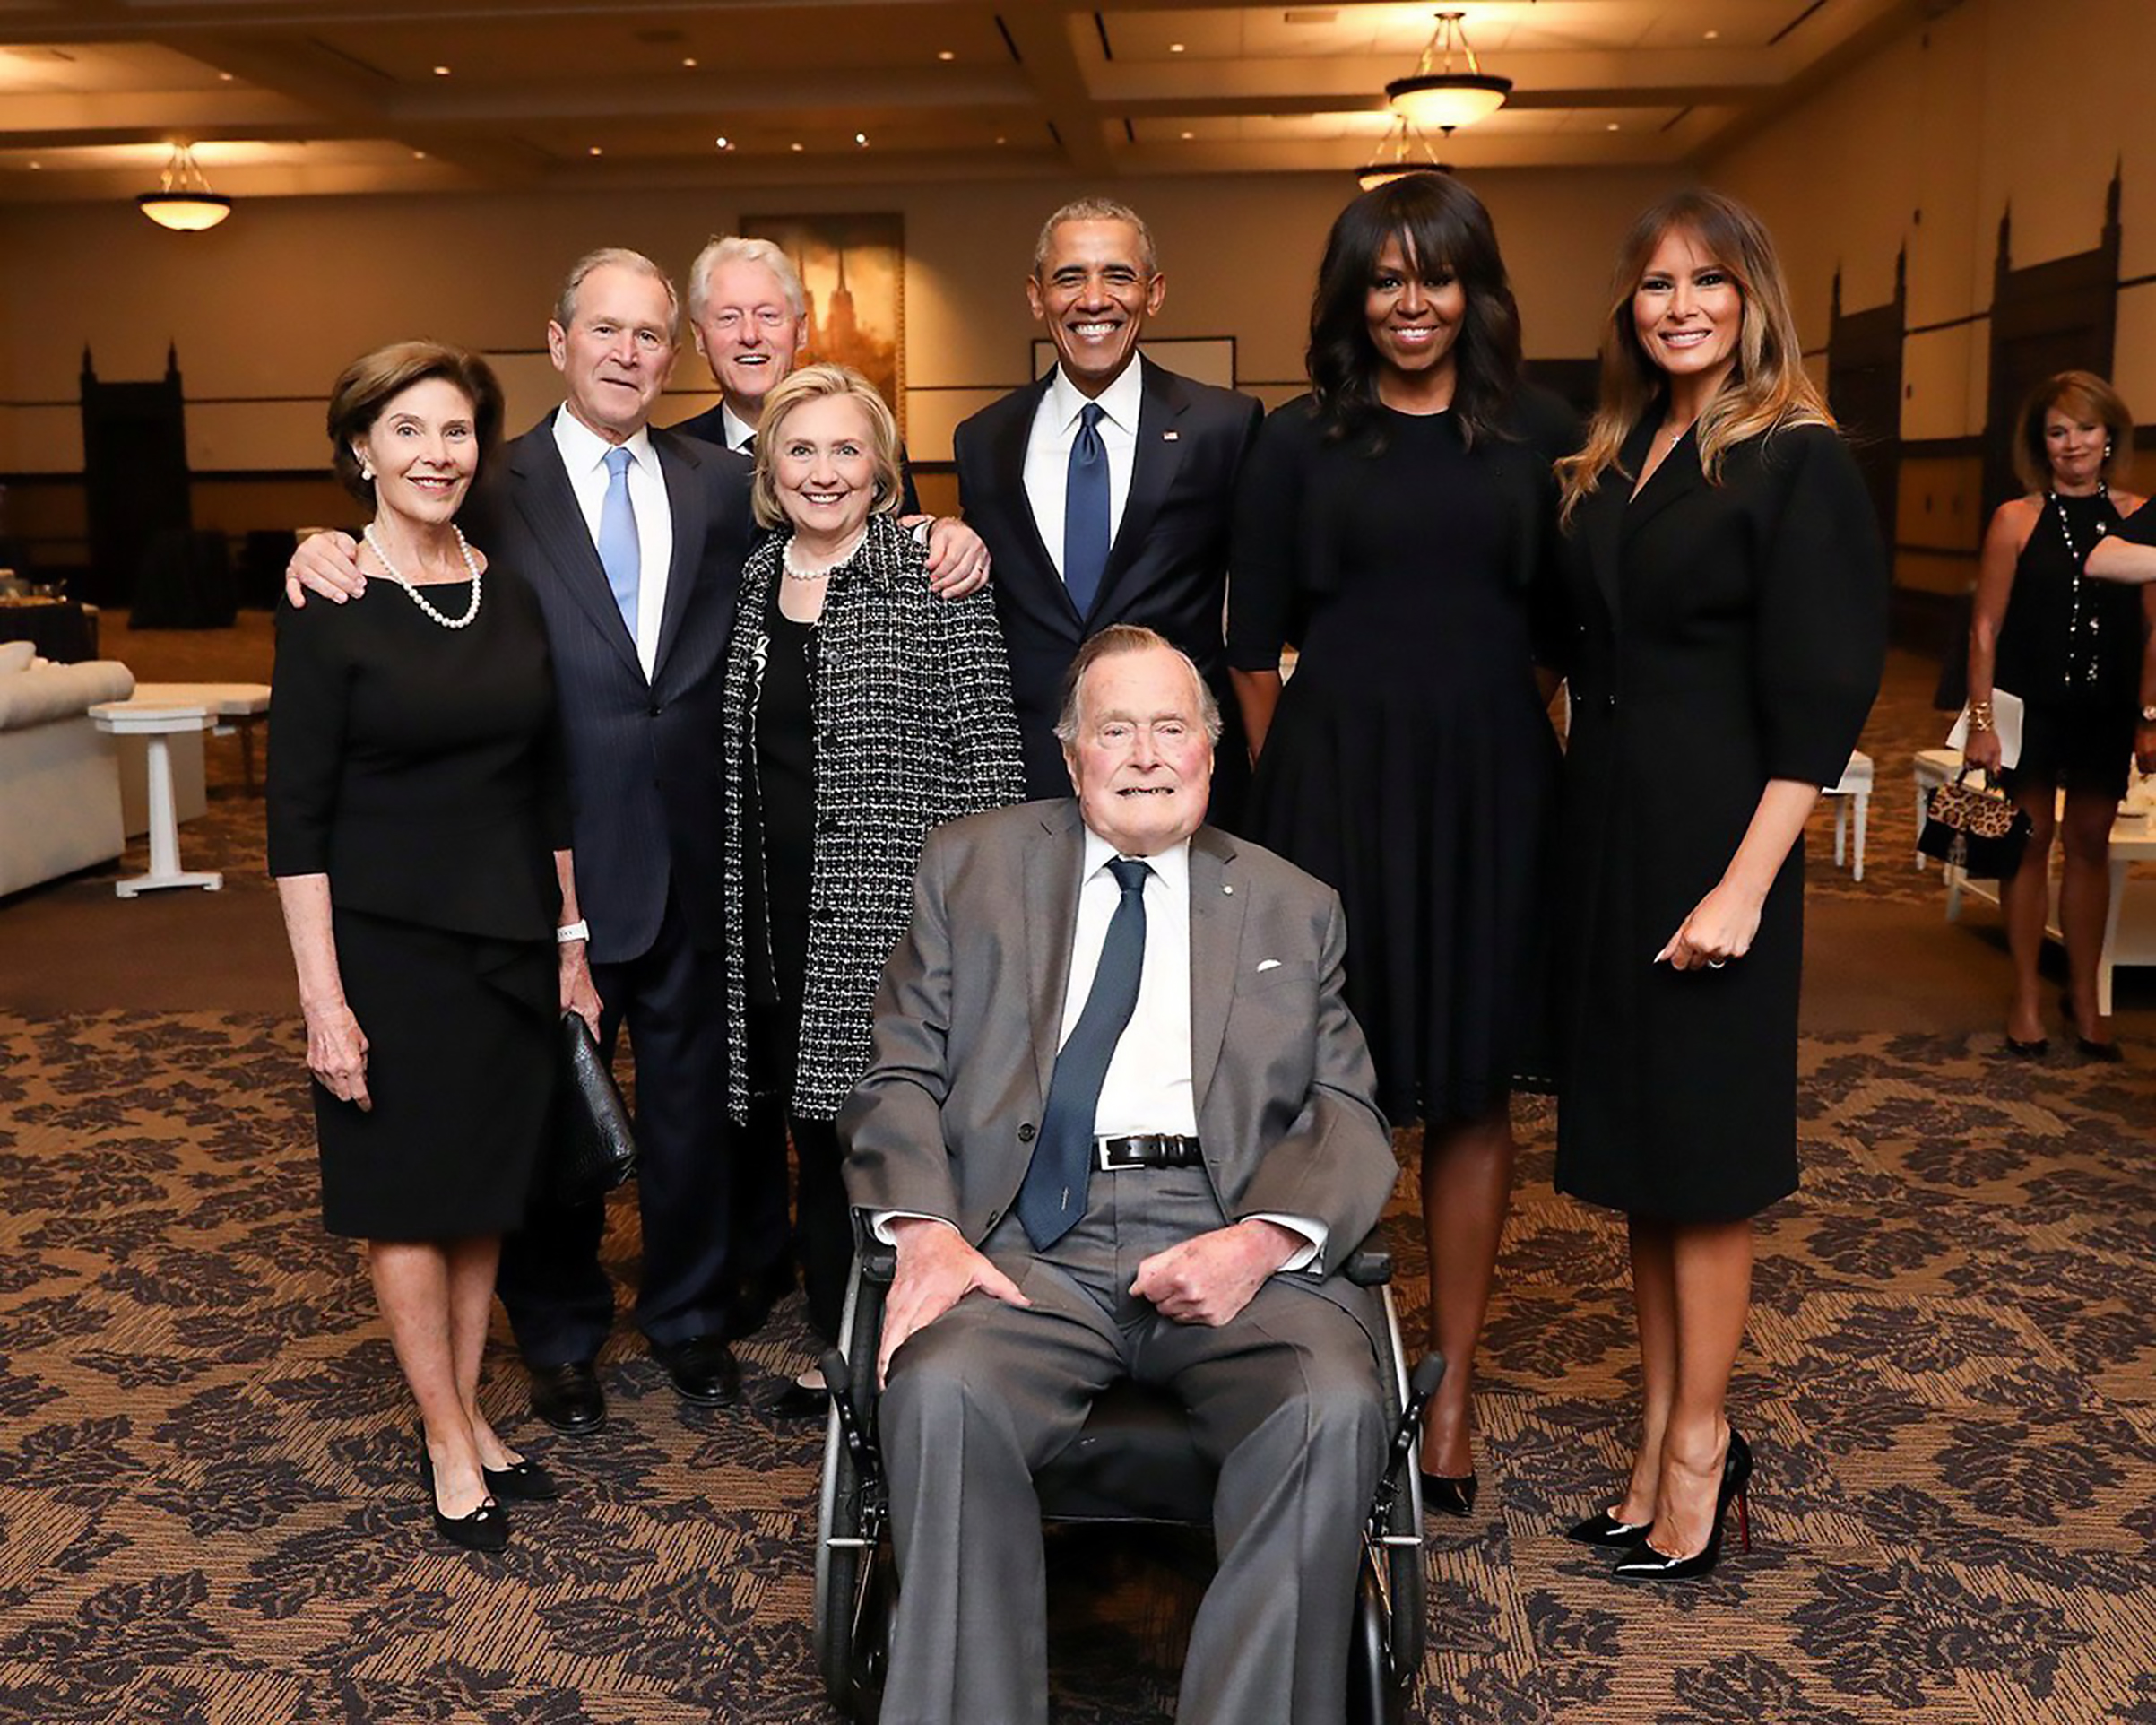 Behind the Viral Photo of 4 Former Presidents and First Ladies | Time